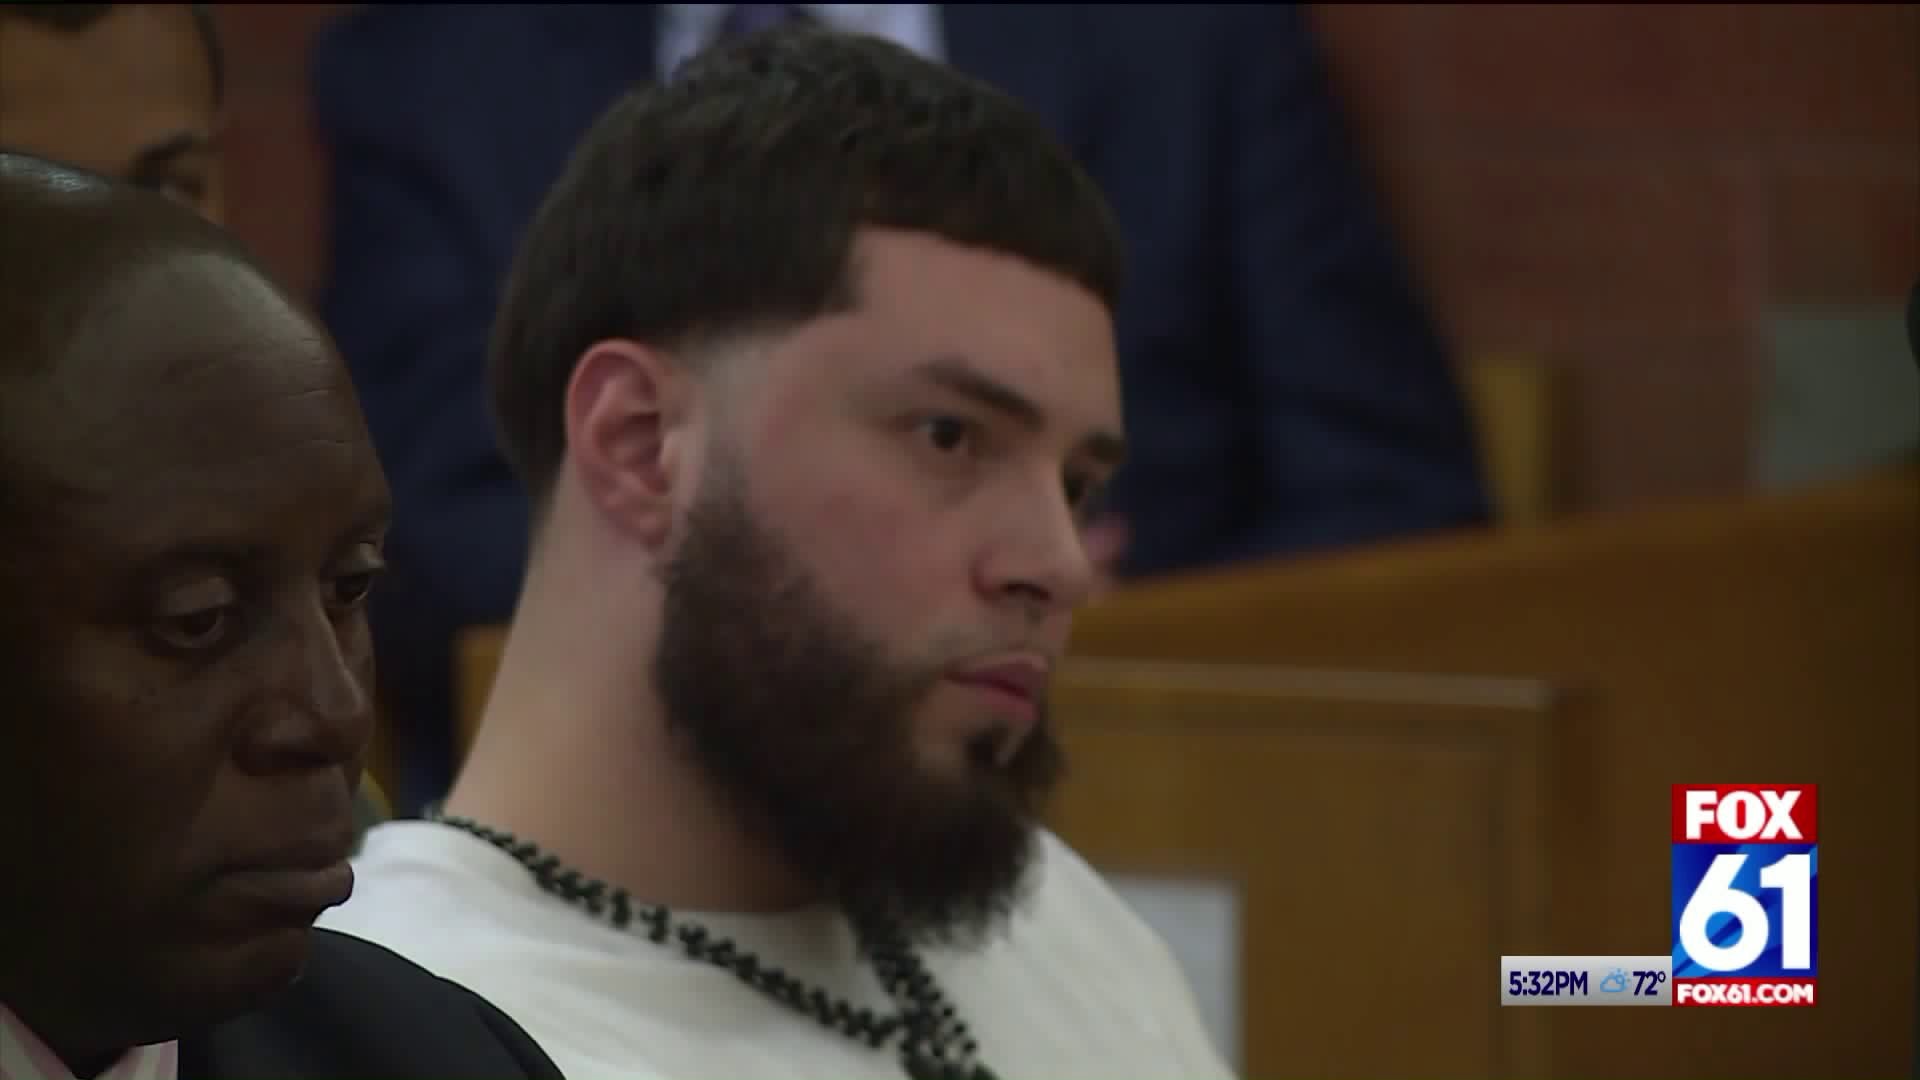 Man accused in fatal hit-and-run to serve 10 years in prison followed by 10 years of special parole